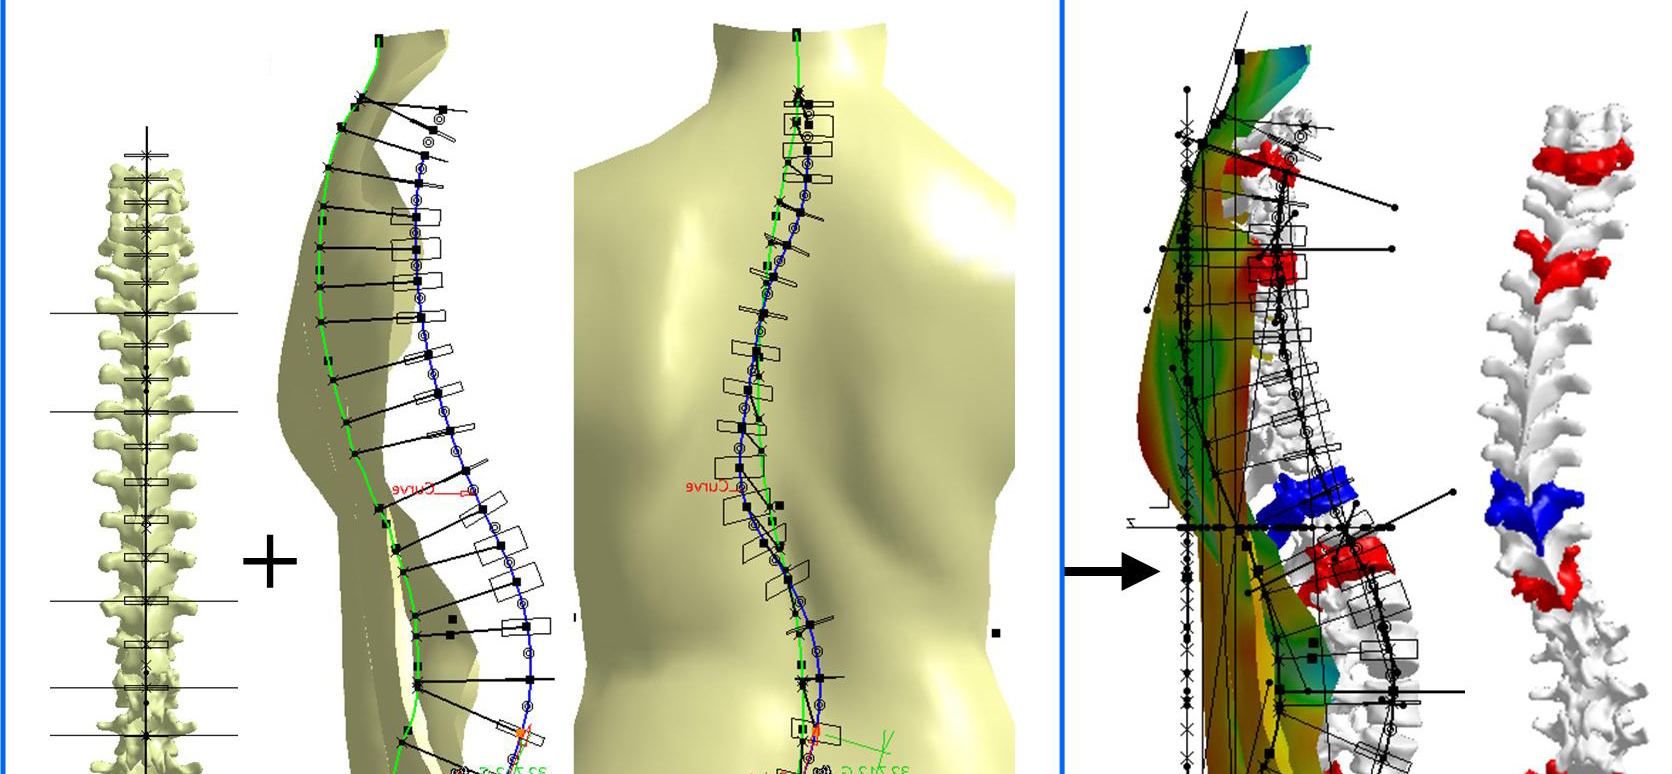 3D Patient-Specific Modeling: Innovative Approach for Scoliosis Diagnosis